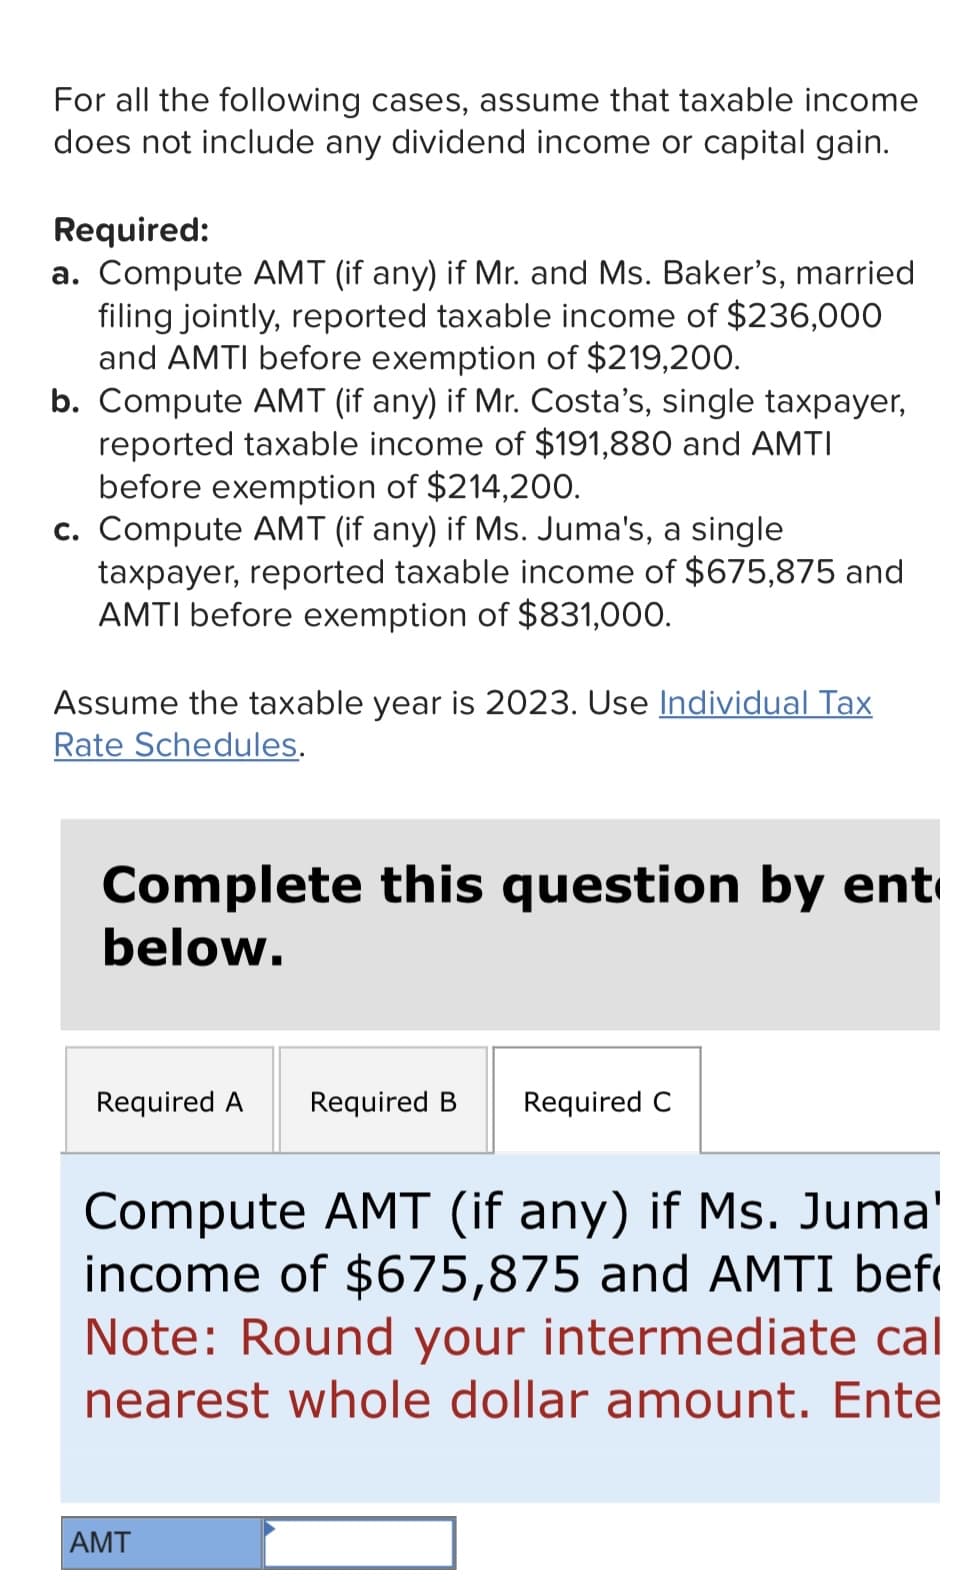 For all the following cases, assume that taxable income
does not include any dividend income or capital gain.
Required:
a. Compute AMT (if any) if Mr. and Ms. Baker's, married
filing jointly, reported taxable income of $236,000
and AMTI before exemption of $219,200.
b. Compute AMT (if any) if Mr. Costa's, single taxpayer,
reported taxable income of $191,880 and AMTI
before exemption of $214,200.
c. Compute AMT (if any) if Ms. Juma's, a single
taxpayer, reported taxable income of $675,875 and
AMTI before exemption of $831,000.
Assume the taxable year is 2023. Use Individual Tax
Rate Schedules.
Complete this question by ent
below.
Required A Required B Required C
Compute AMT (if any) if Ms. Juma'
income of $675,875 and AMTI bef
Note: Round your intermediate cal
nearest whole dollar amount. Ente
AMT